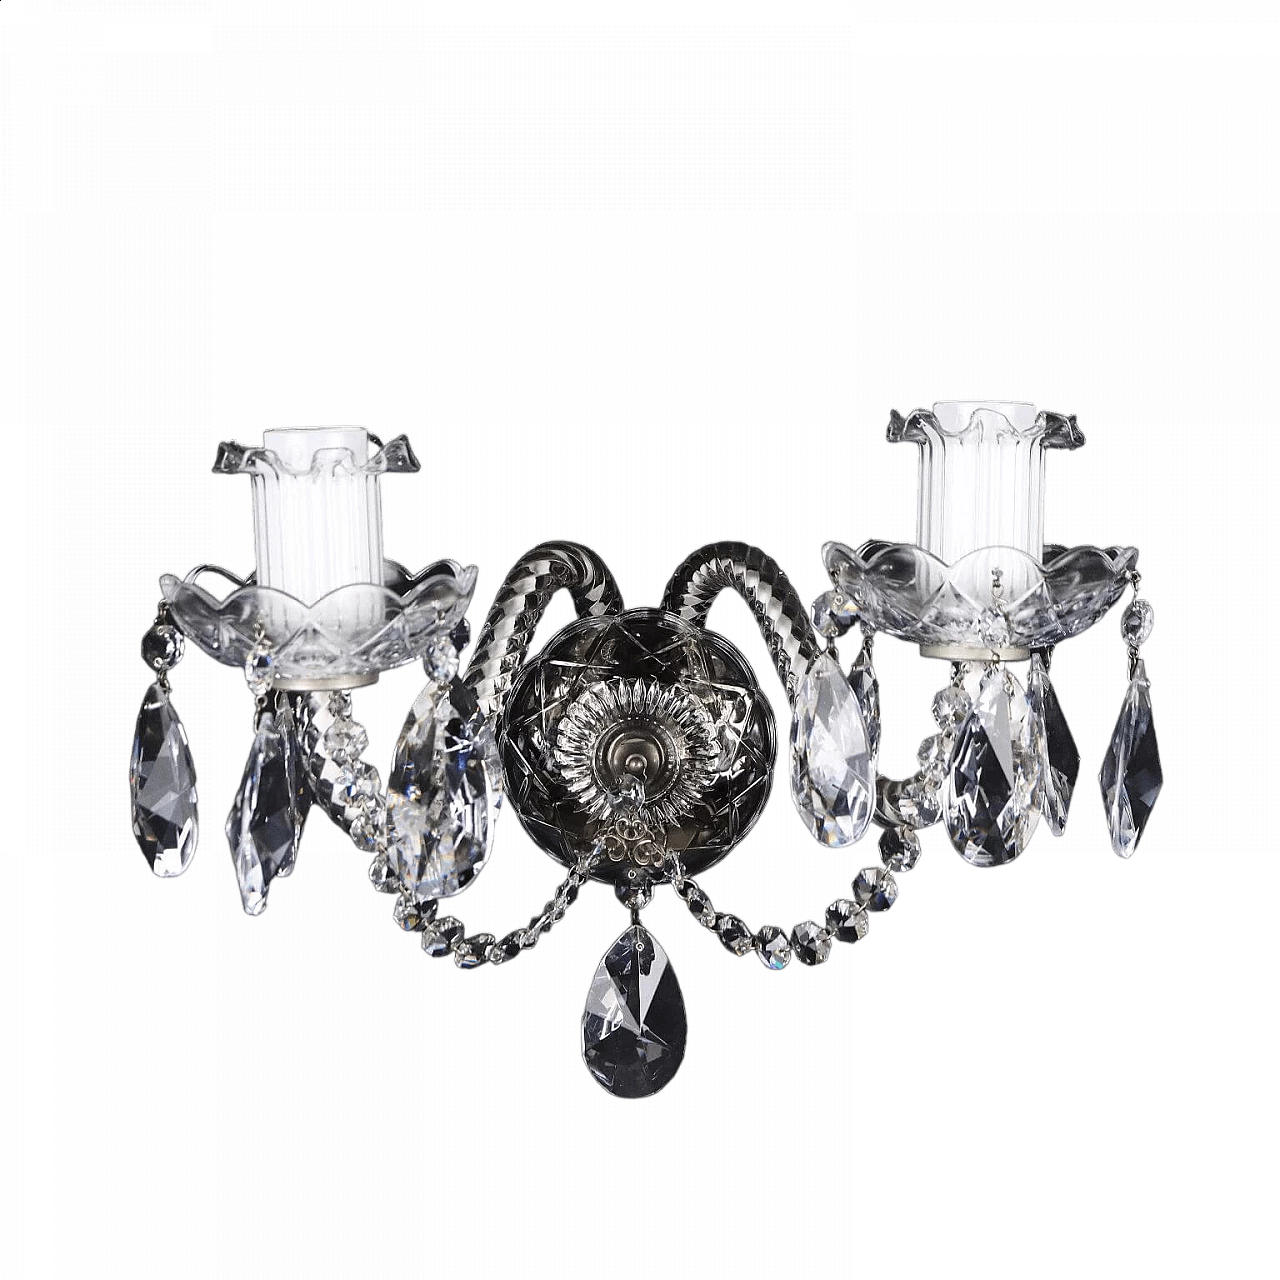 Two-light wall sconce with crystal arms, bobeches and pendants 7